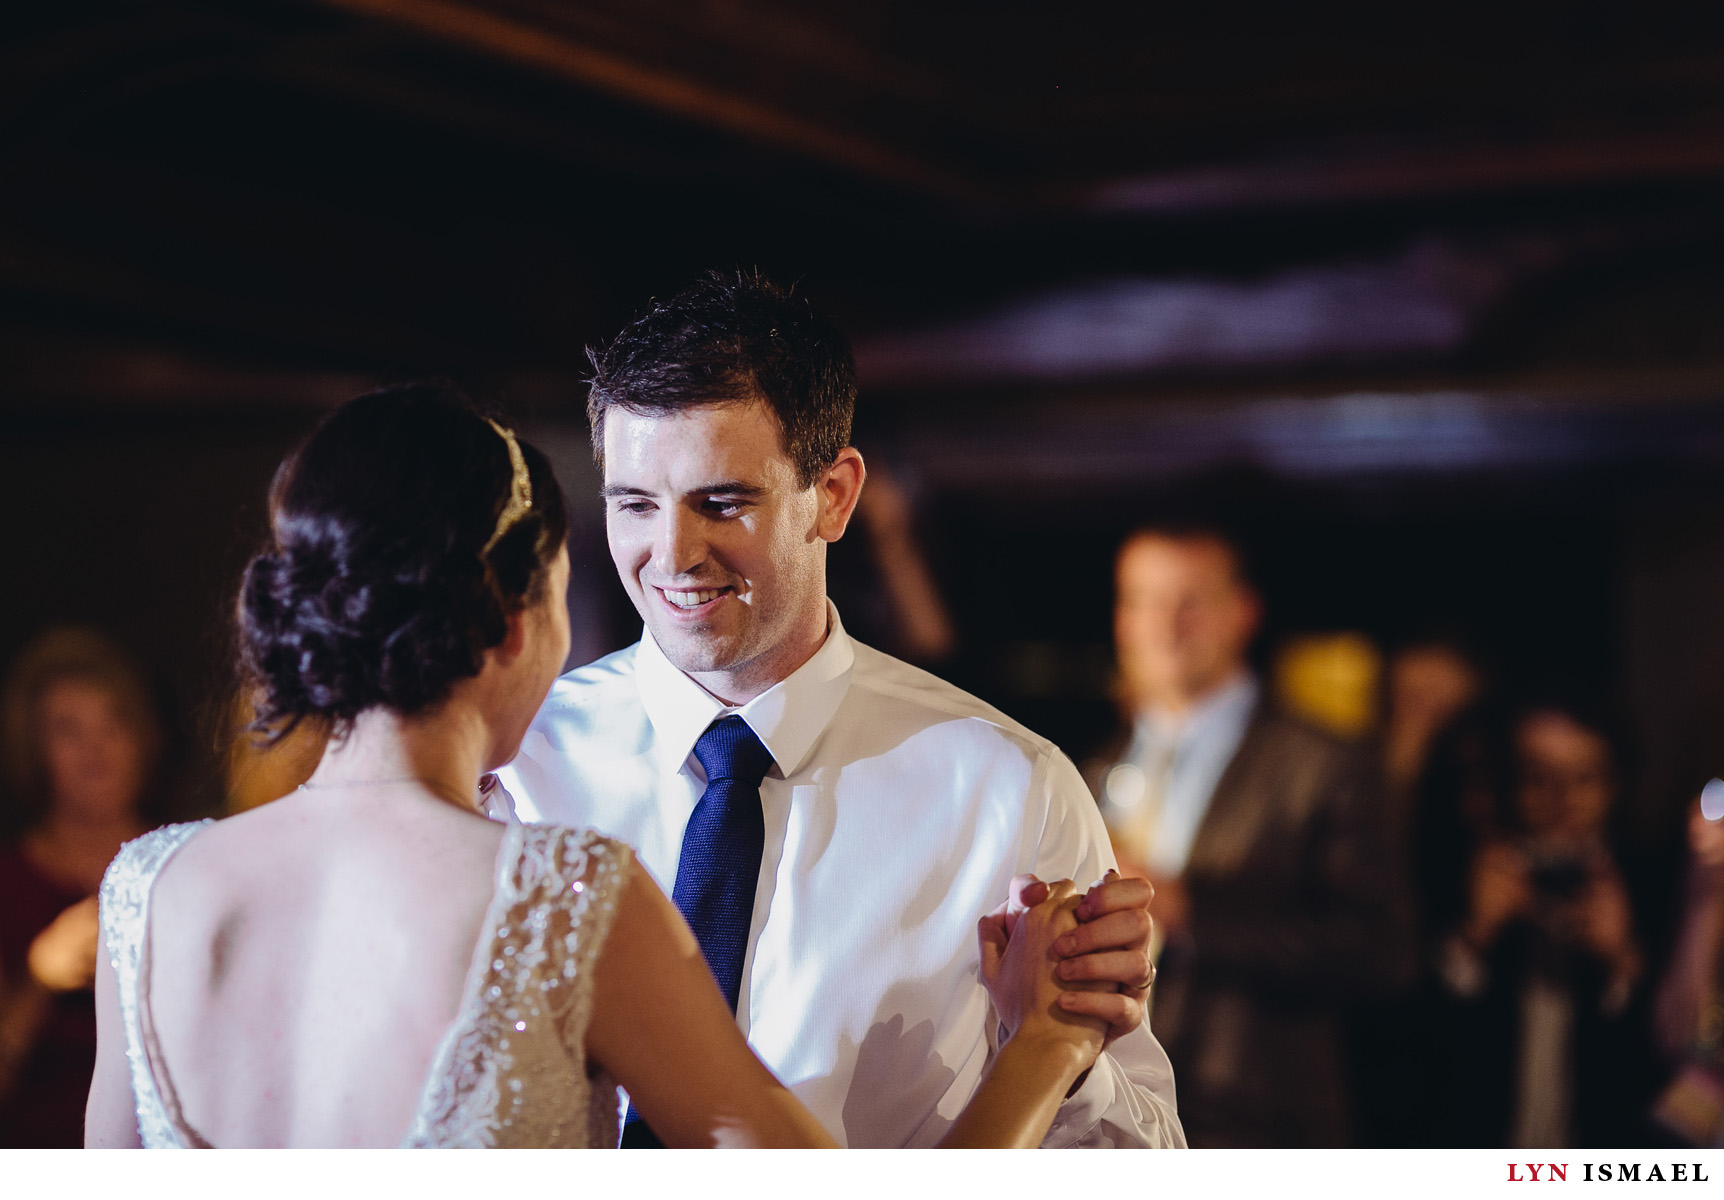 Handsome groom dance with his beautiful bride at a Windermere Manor wedding.